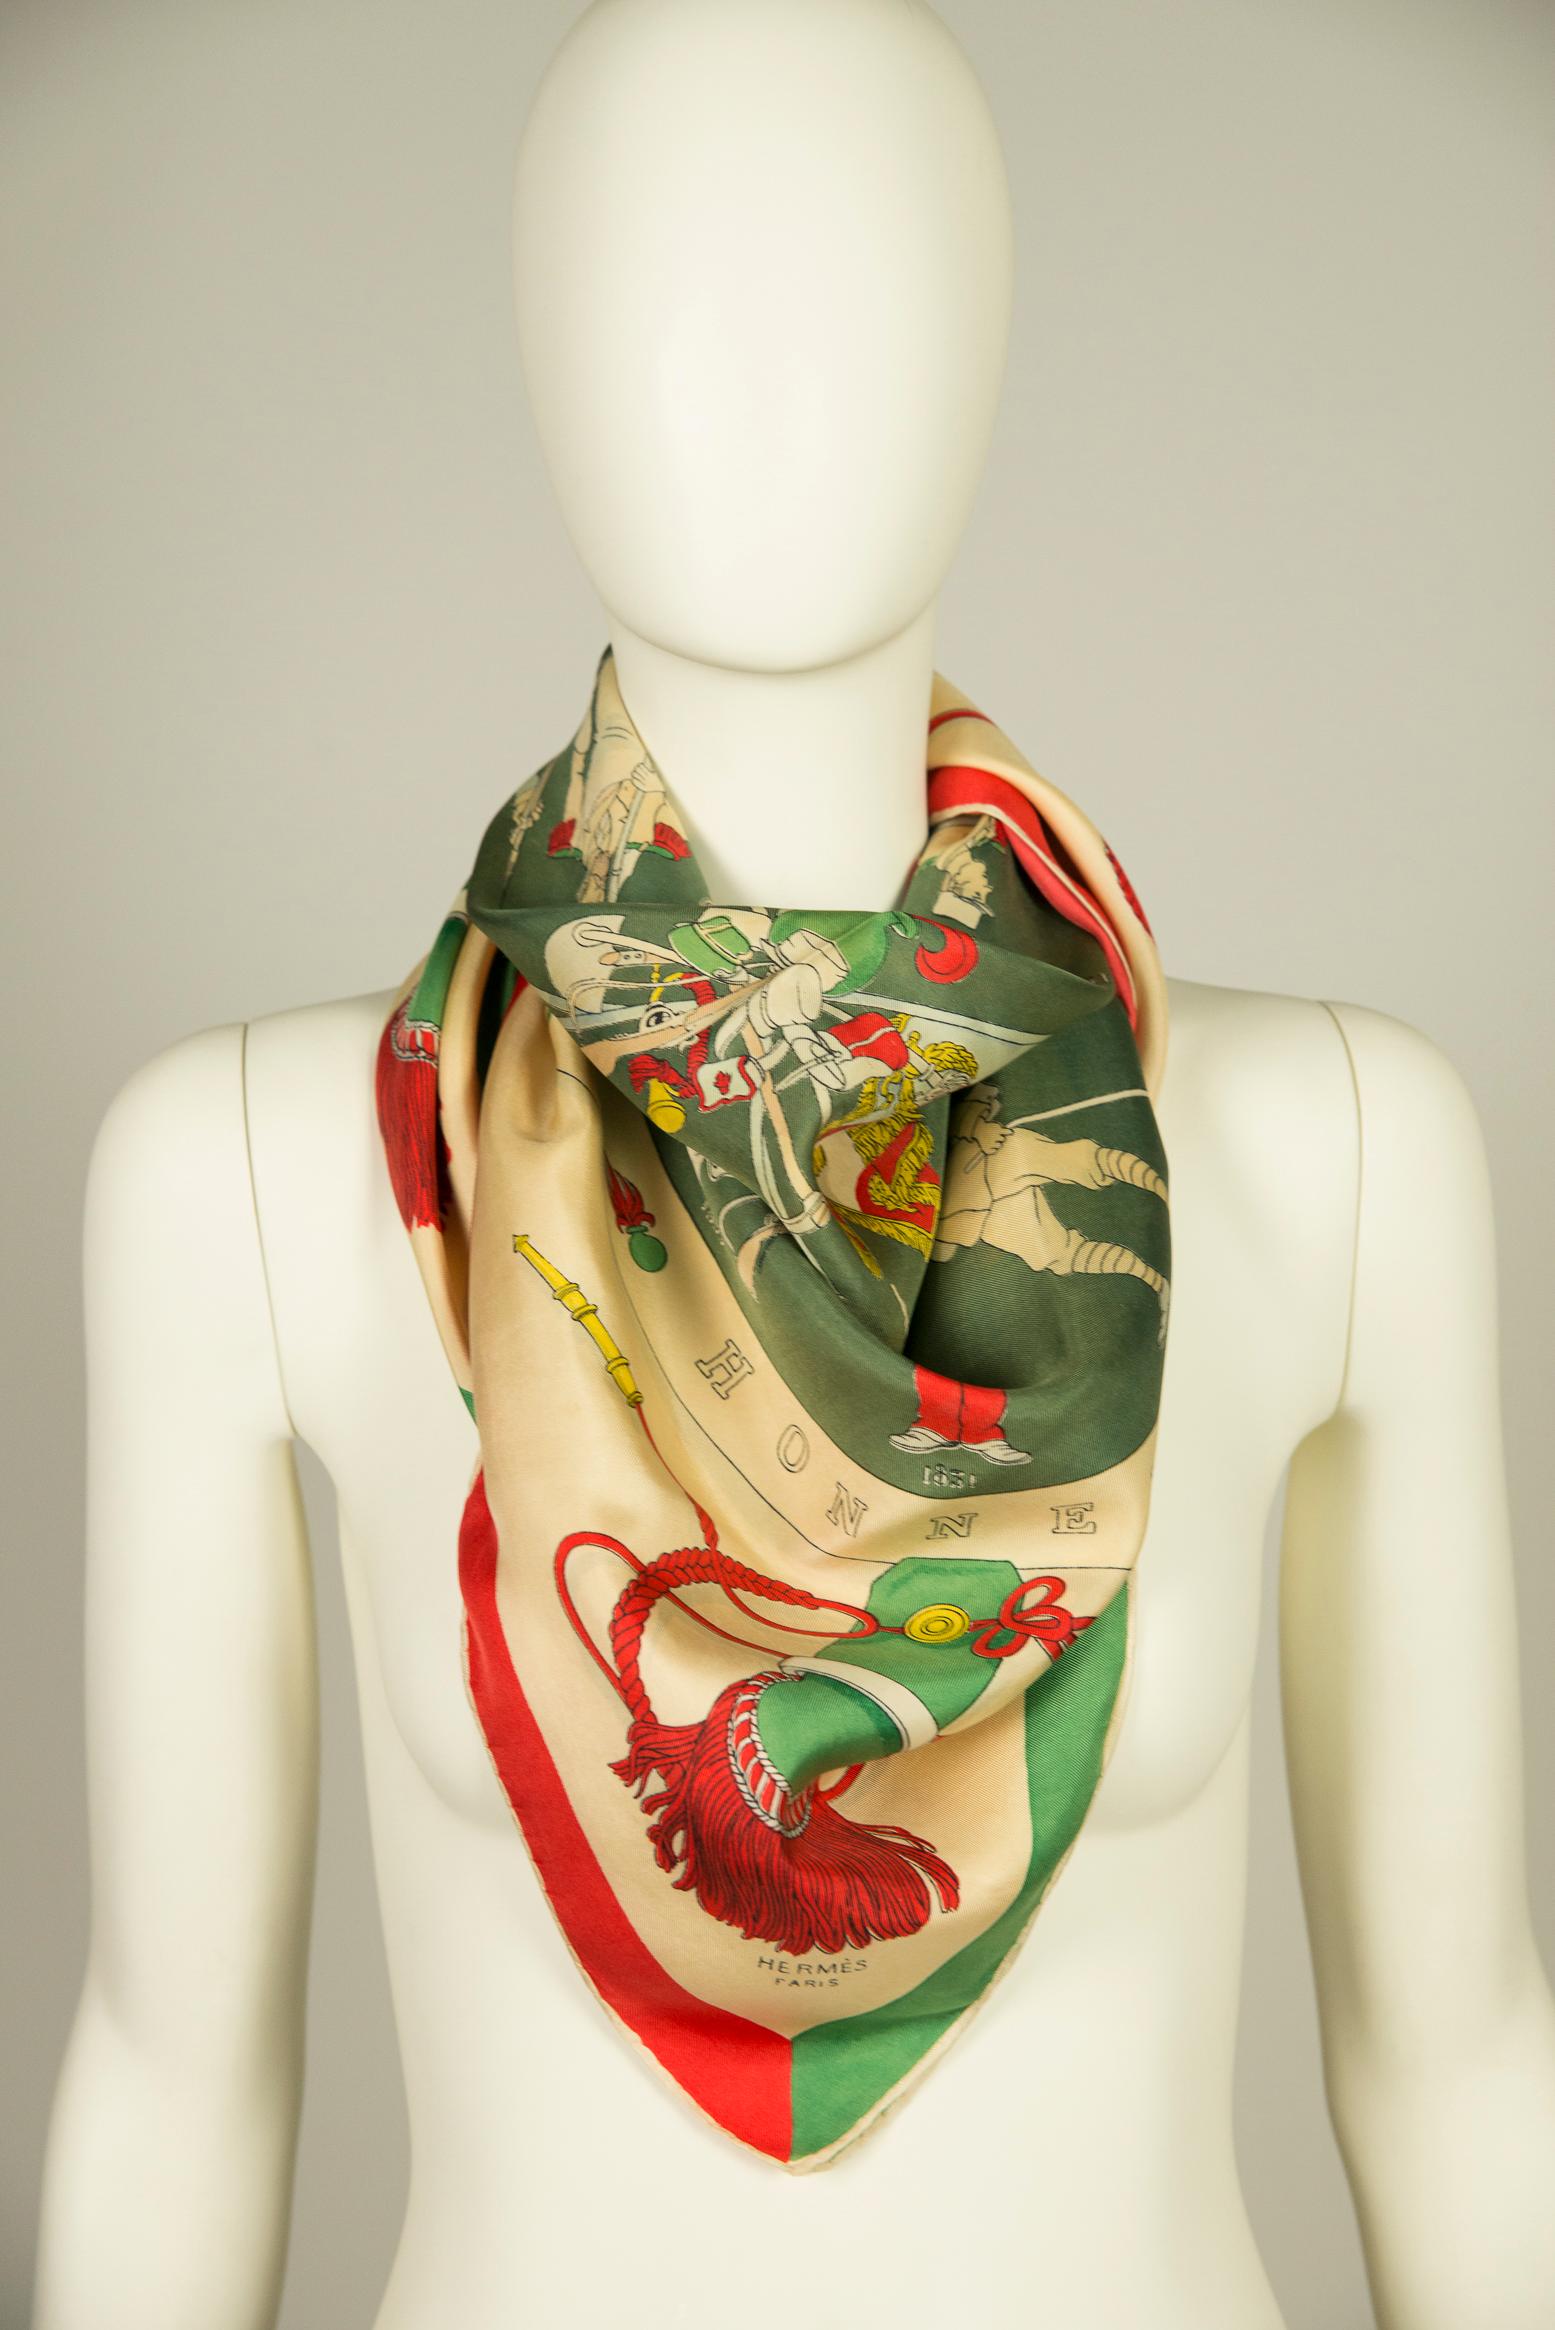 Very rare Hermès “A la Gloire de la Légion Etrangère” silk twill Carré scarf. Signed by Hugo Grygkar and issued in 1951, this scarf pays hommage to a specific corps of the French Army : the French Foreign Legion. The print depicts 16 legionnaires in